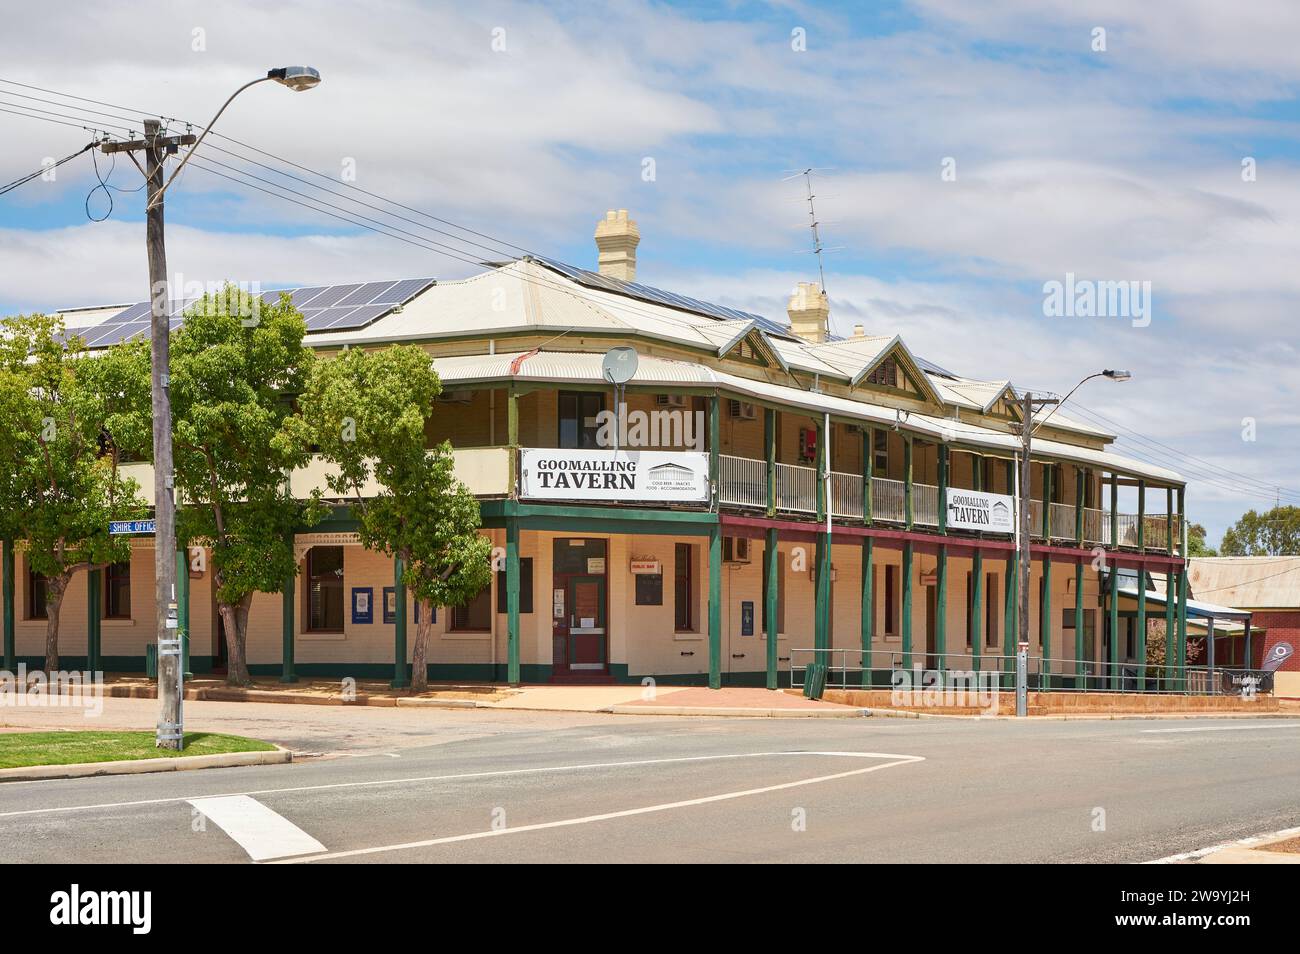 The Goomalling Tavern, a country pub offering beer, food and accommodation in the Wheatbelt town of Goomalling, Western Australia. Built from 1904. Stock Photo